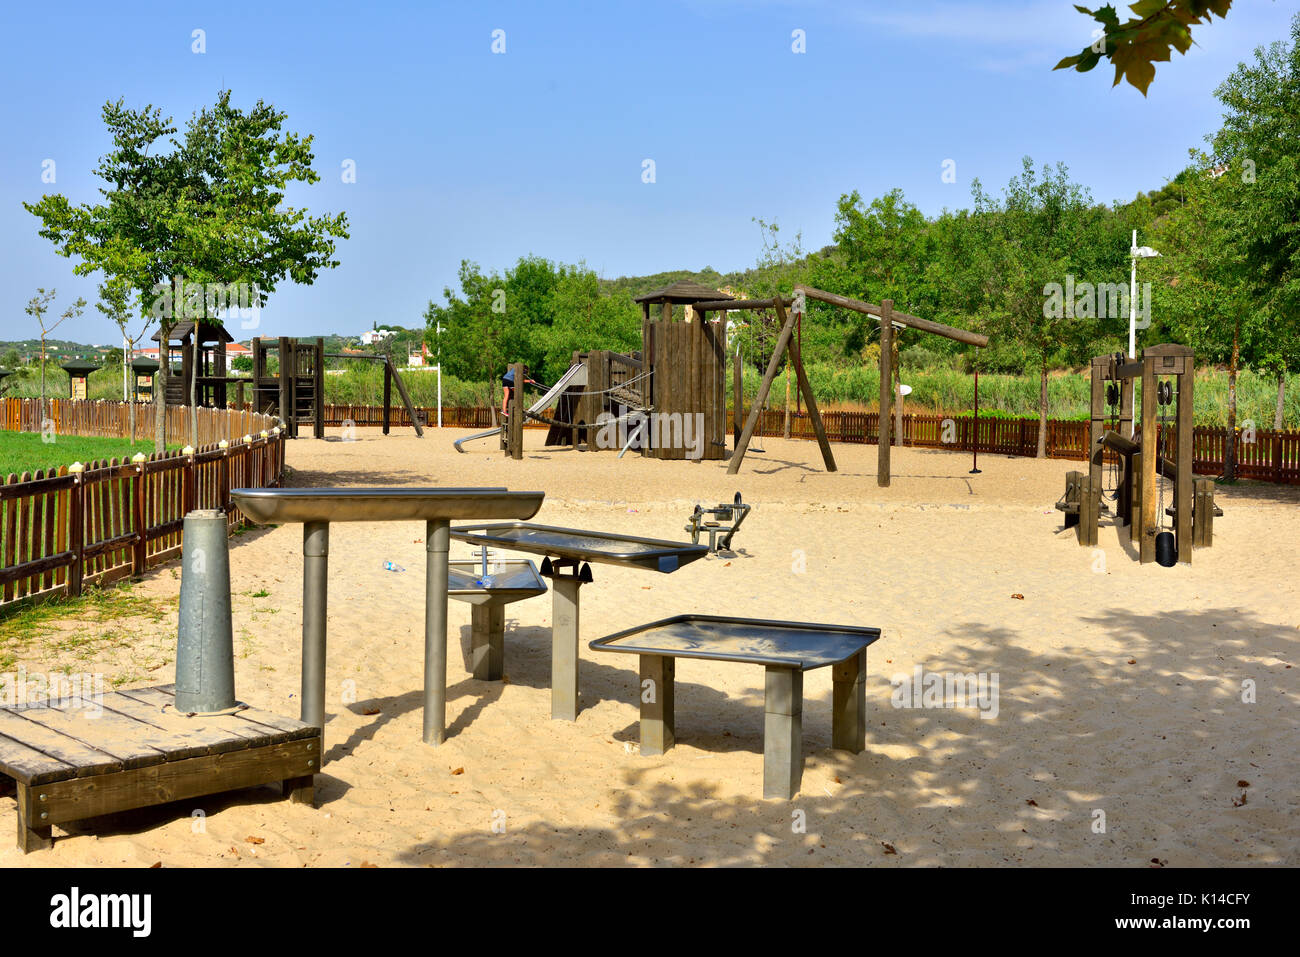 Outdoor adult exercise area adjacent to children's playground Stock Photo